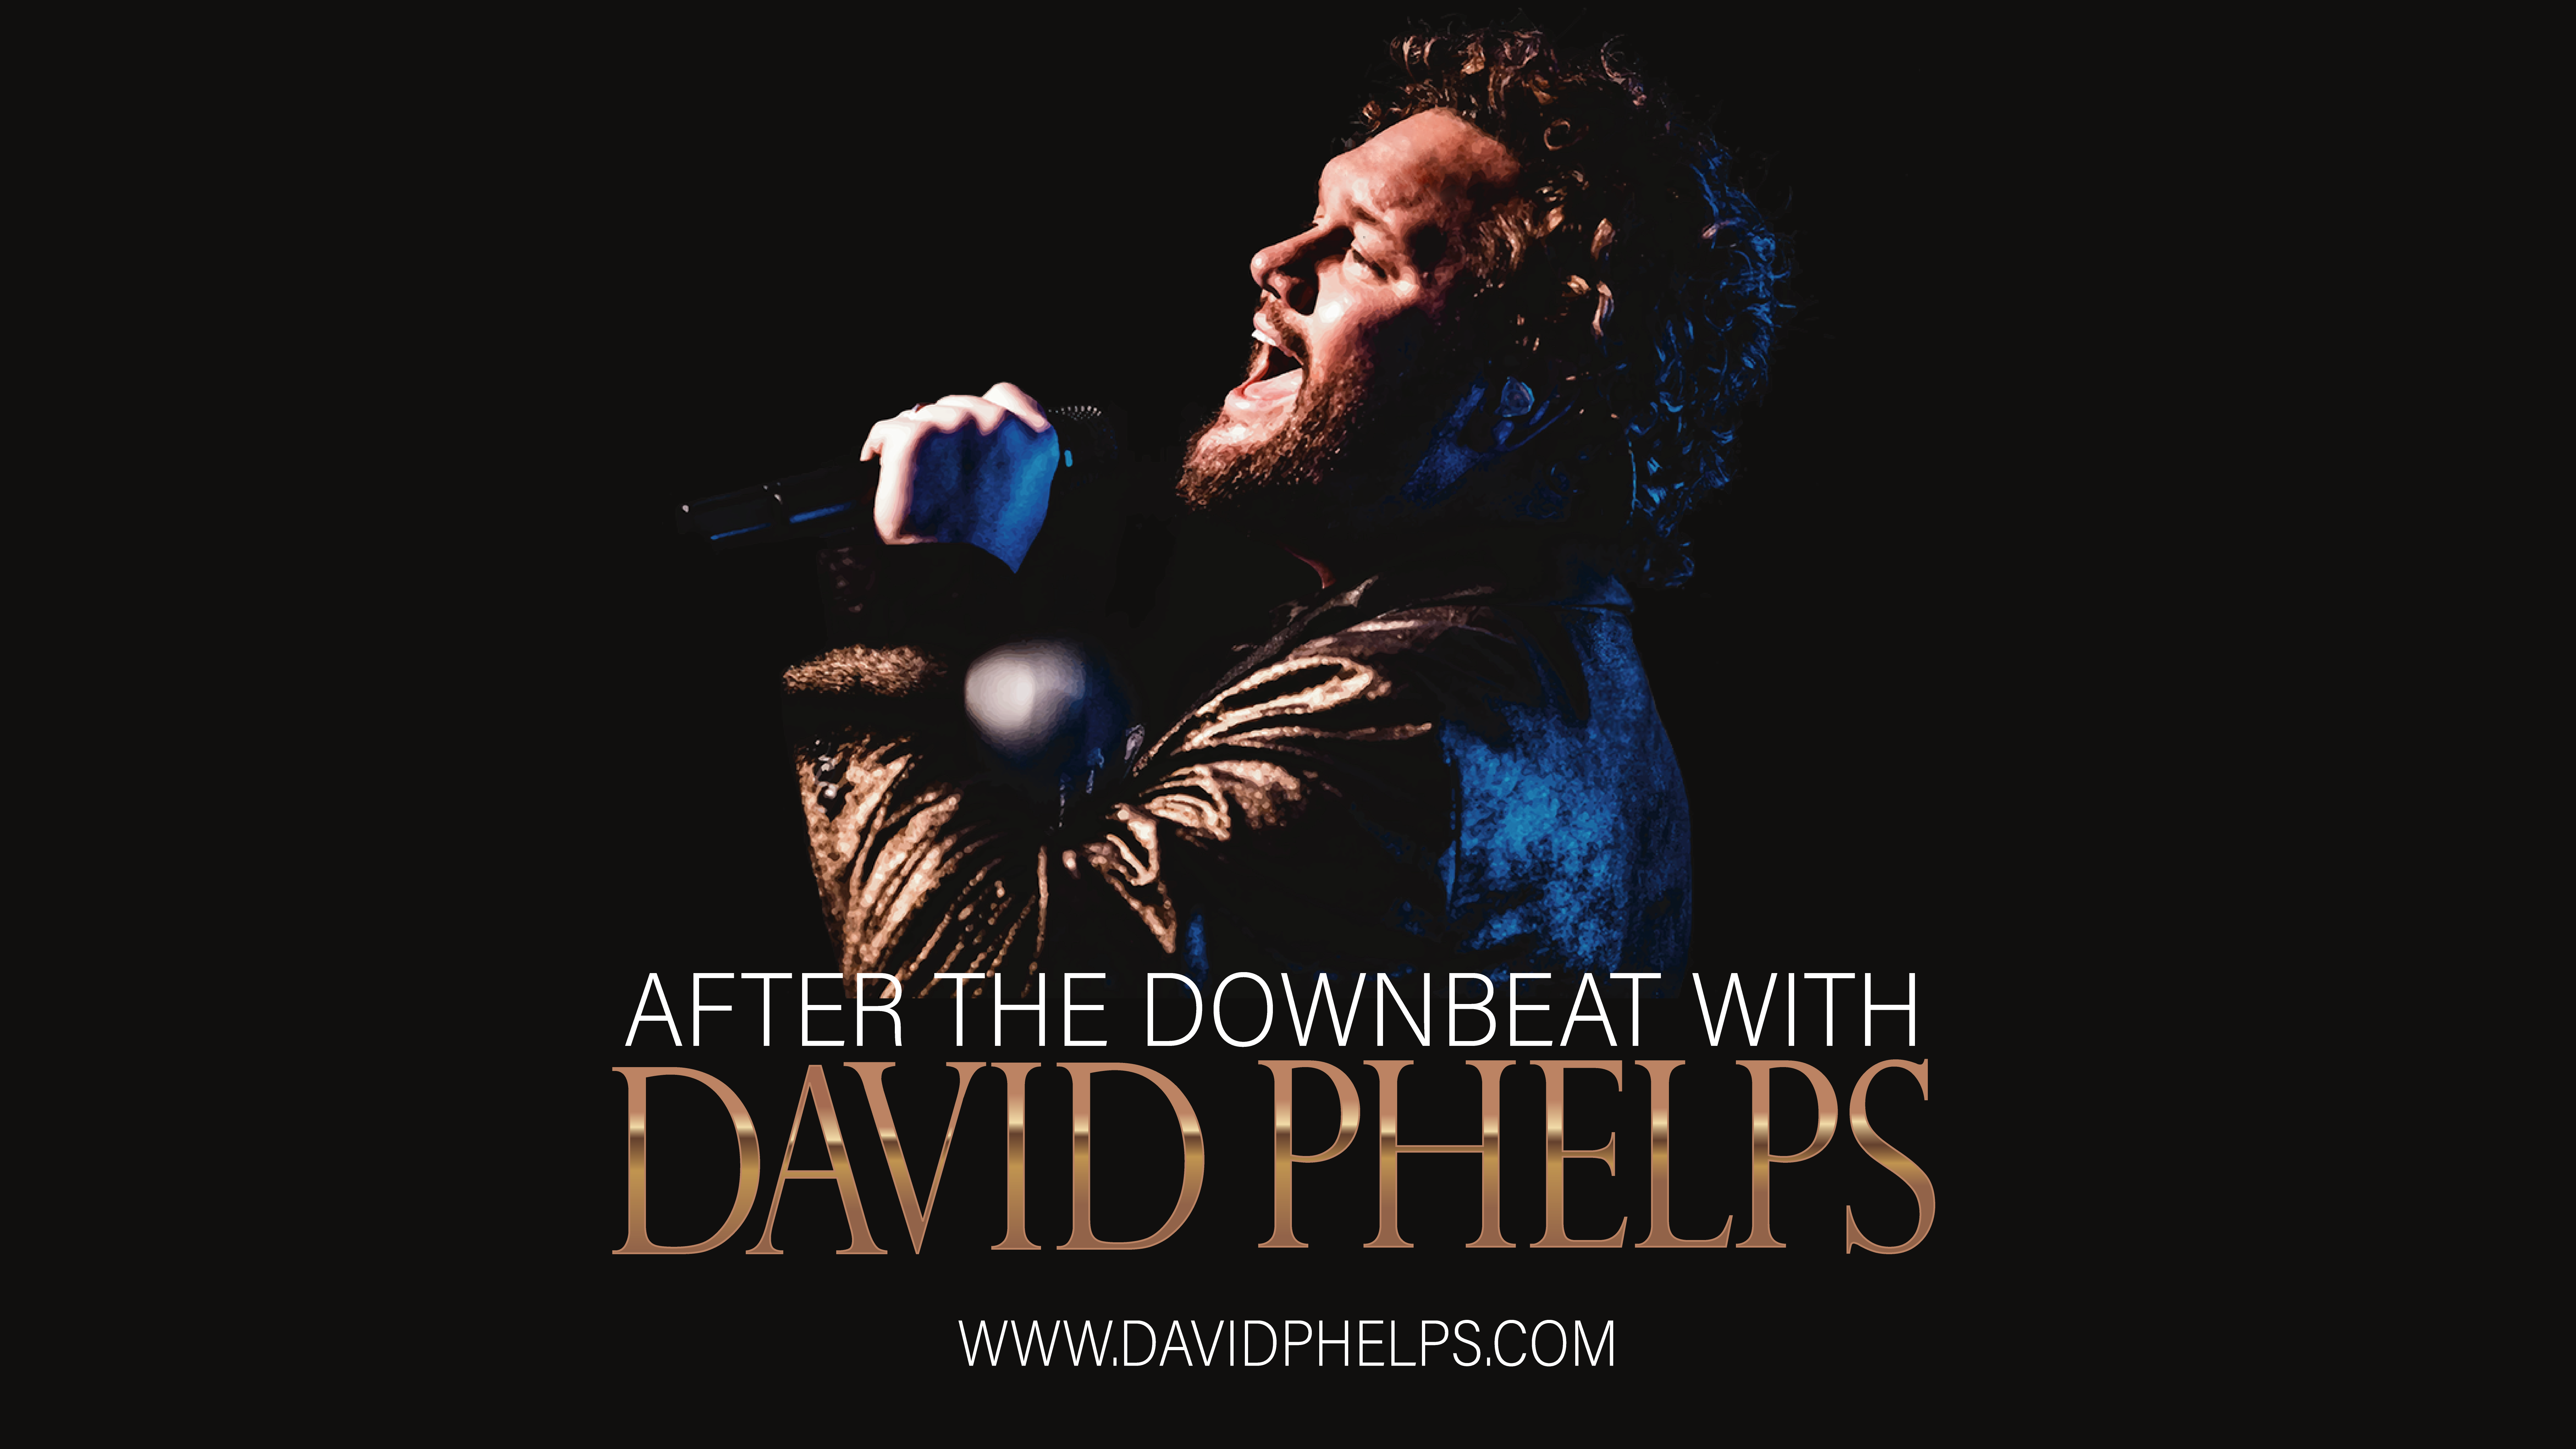 After The Downbeat with David Phelps – Tickets On Sale Now!